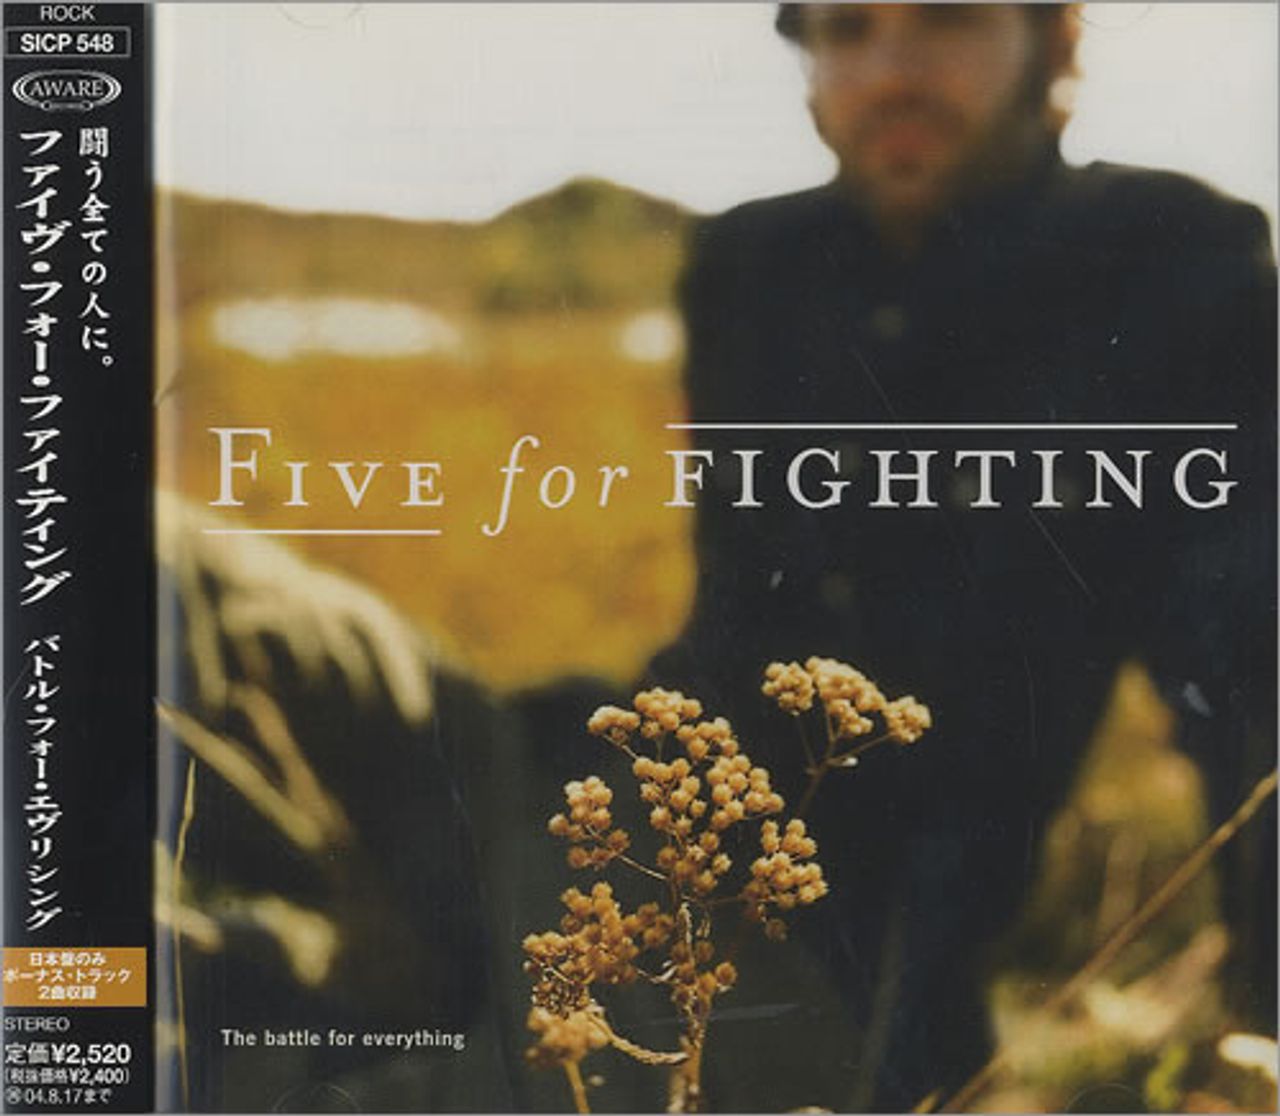 Five For Fighting The Battle For Everything Japanese Promo CD album (CDLP) SICP-548